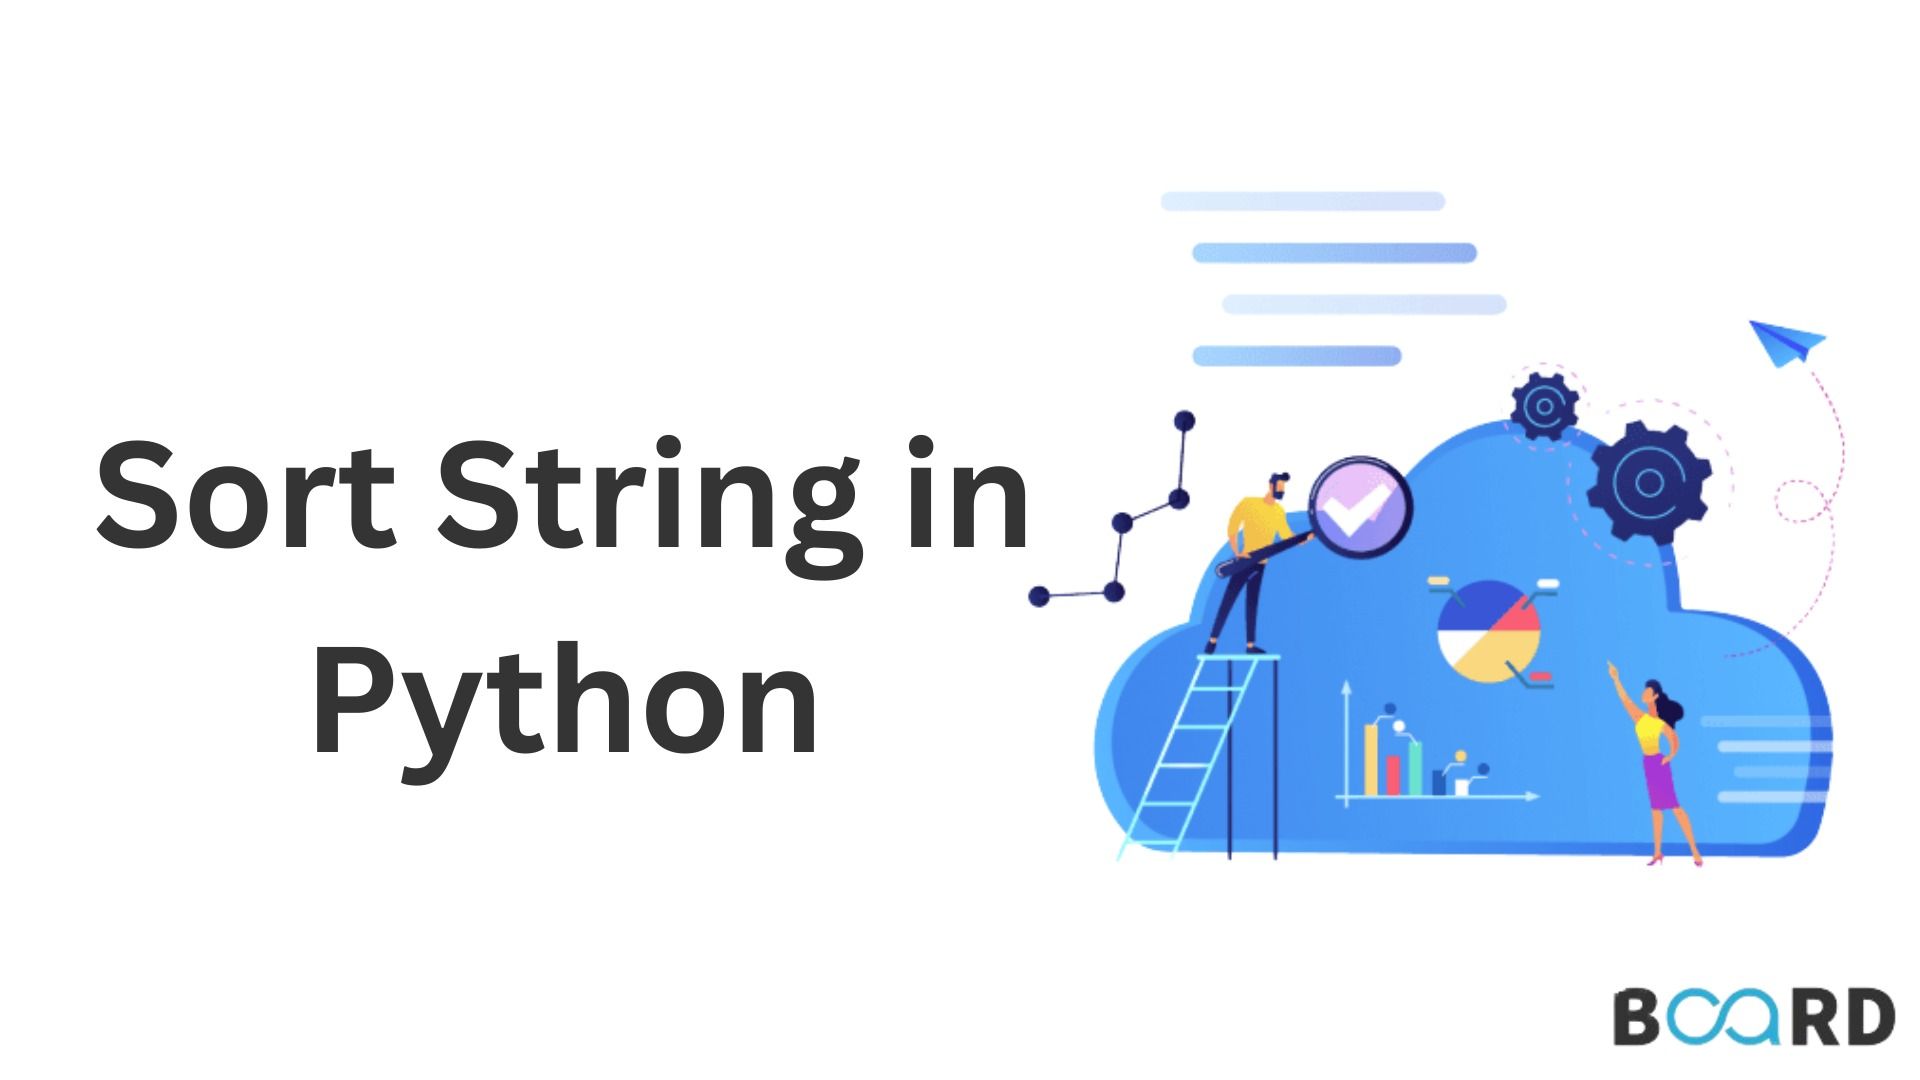 How to sort string in Python?